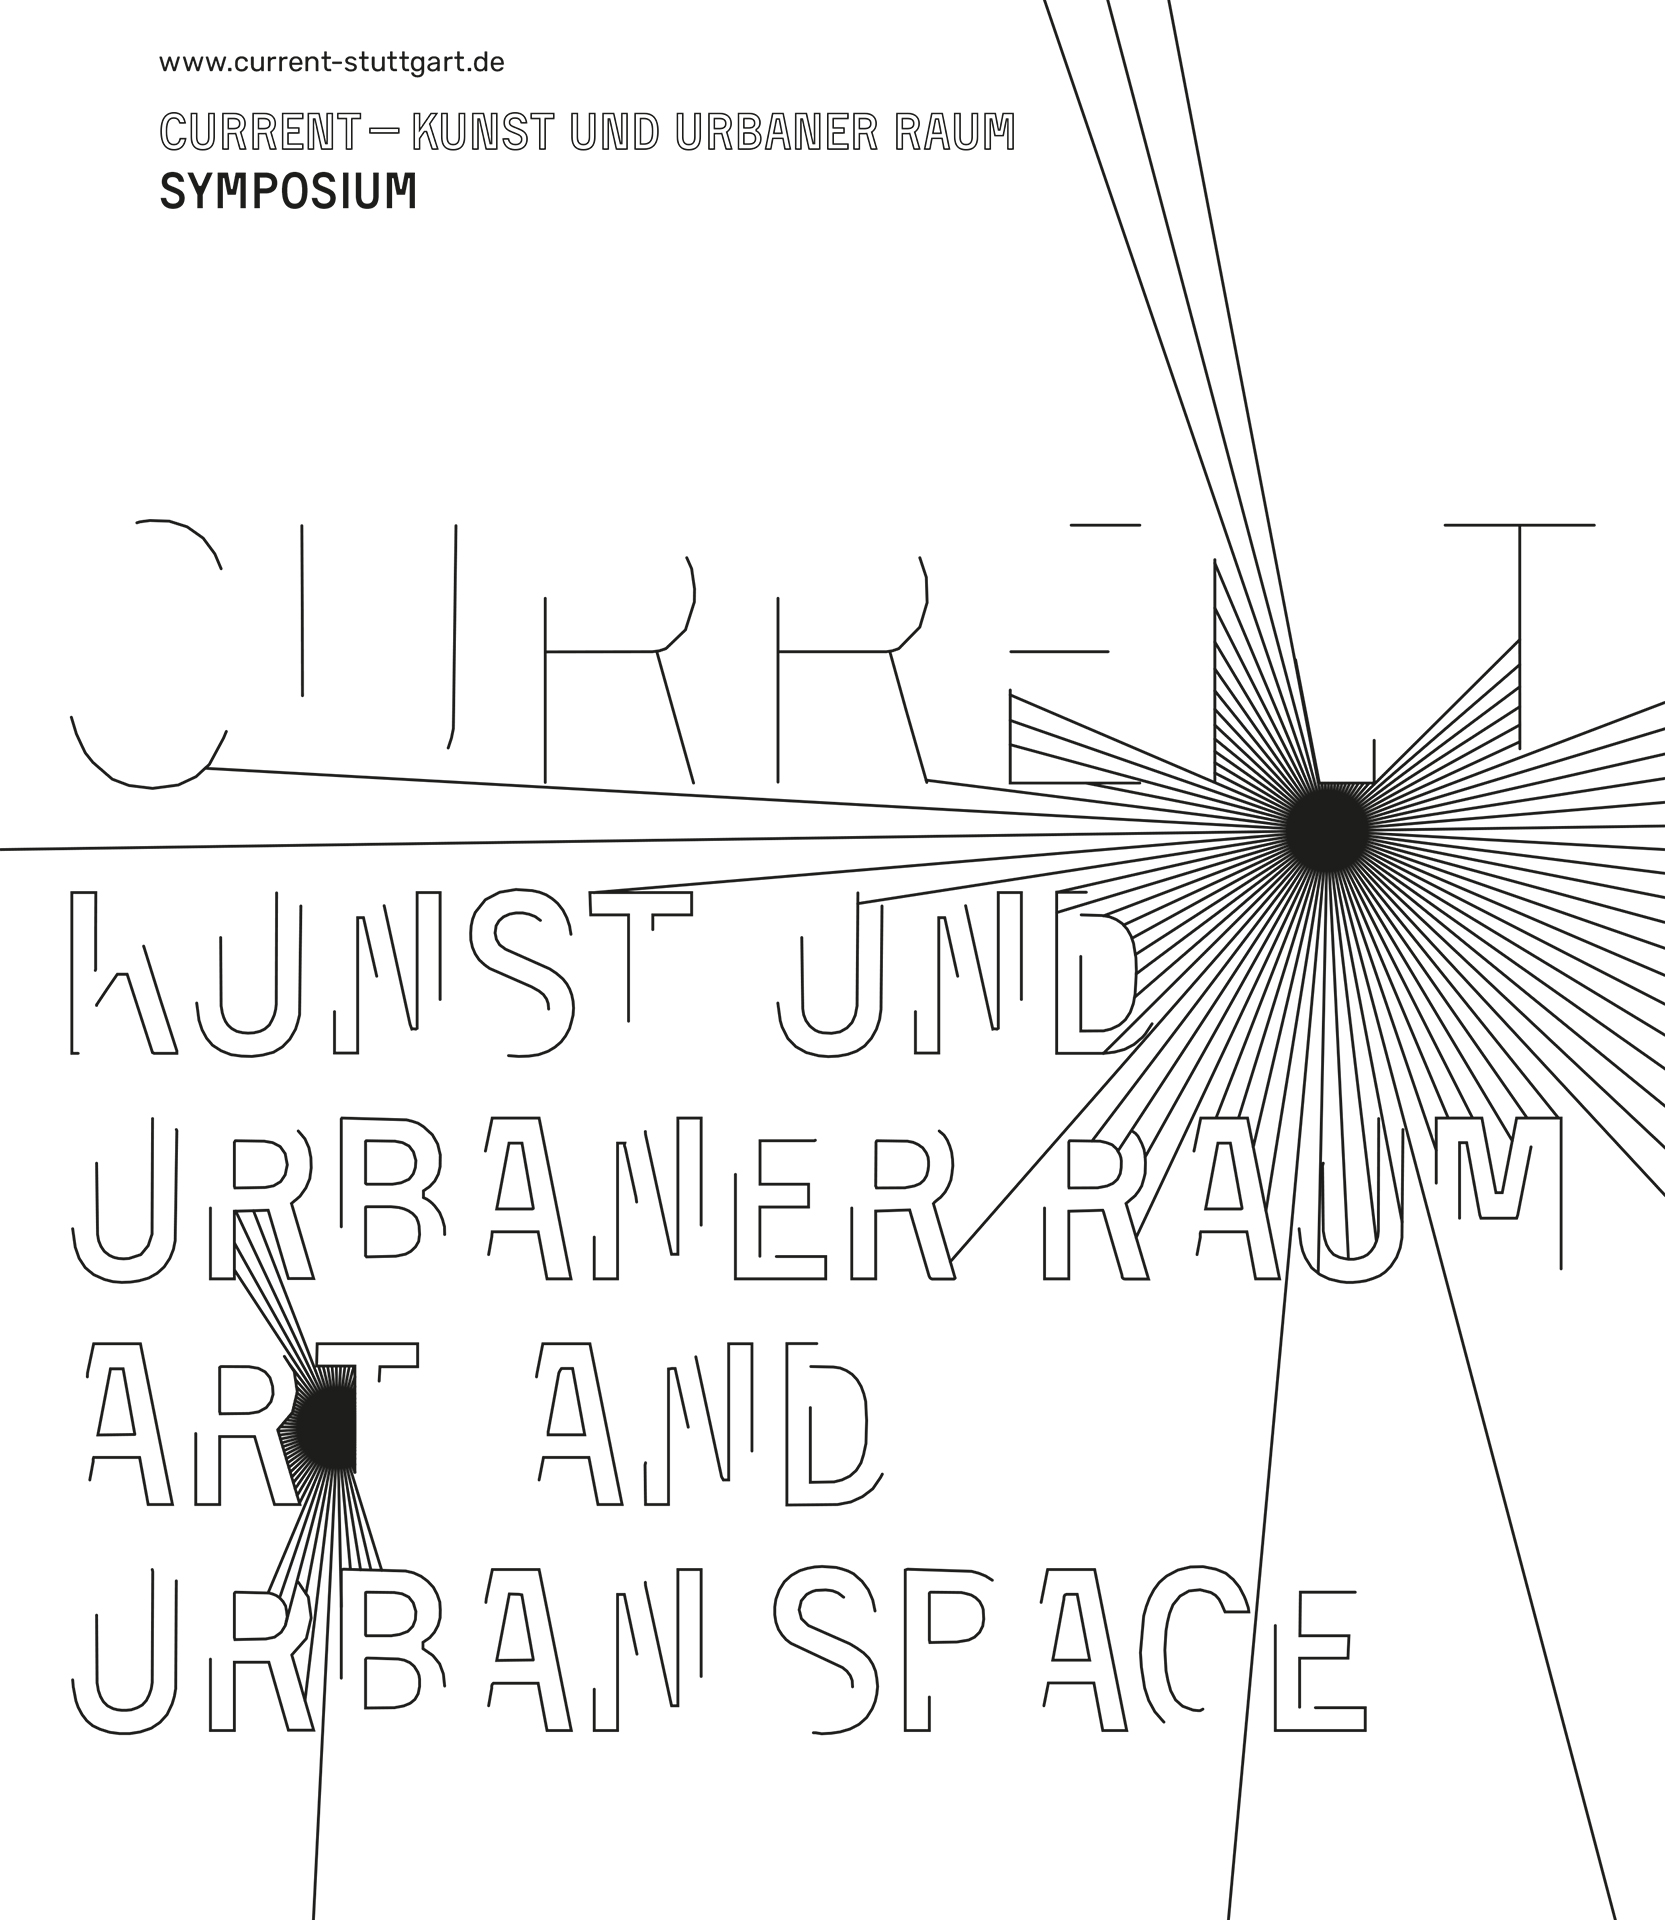 CURRENT: Art and Urban Space - in assembly